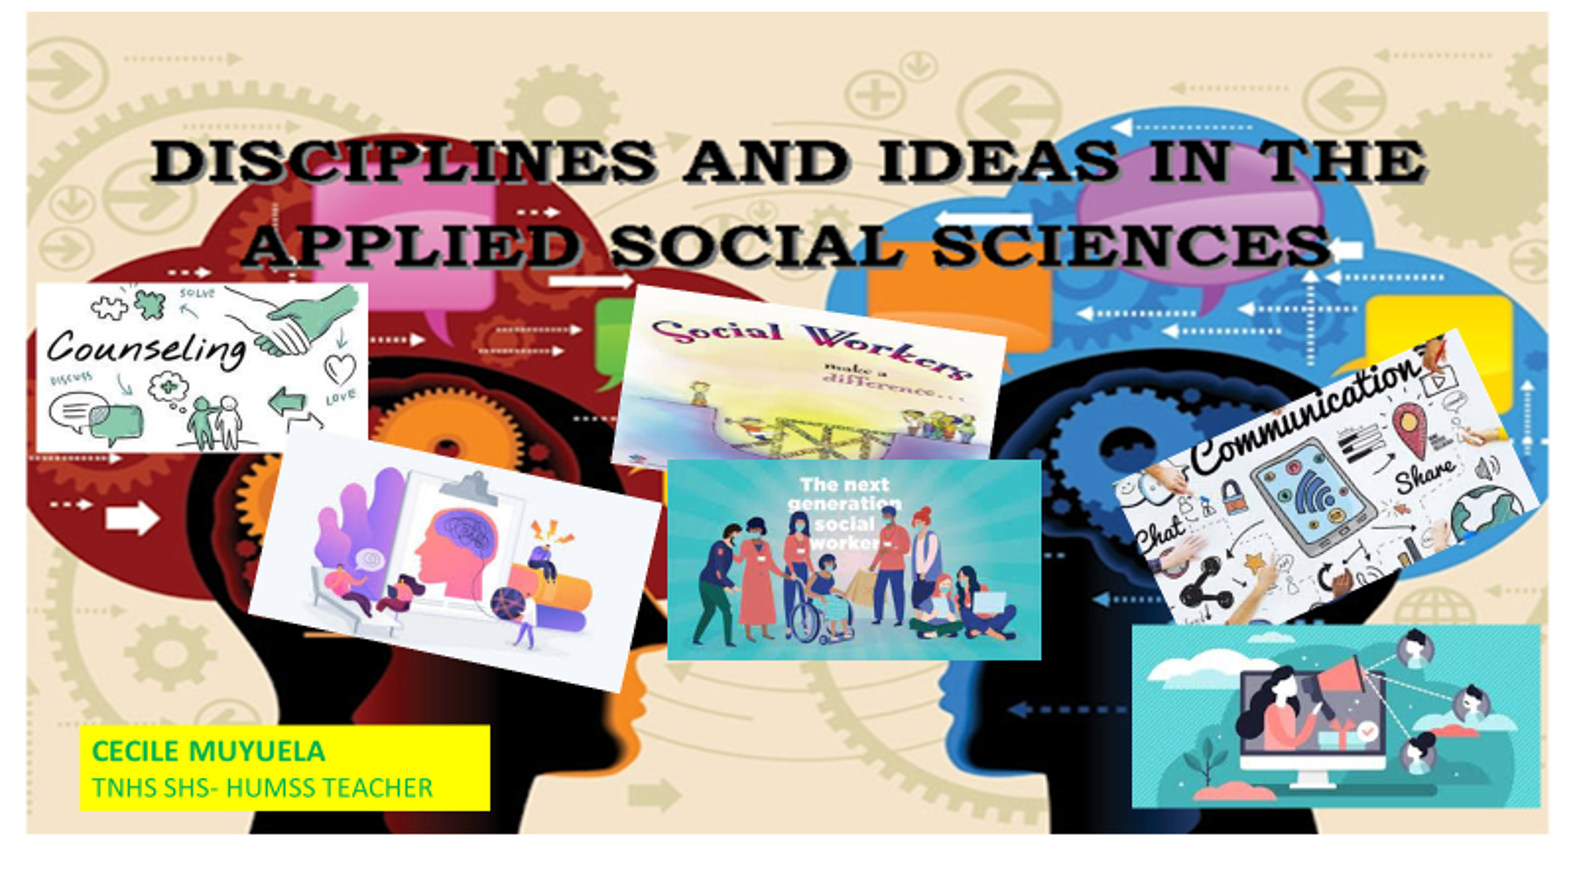 Disciplines and Ideas in the Applied Social Sciences (DIASS)